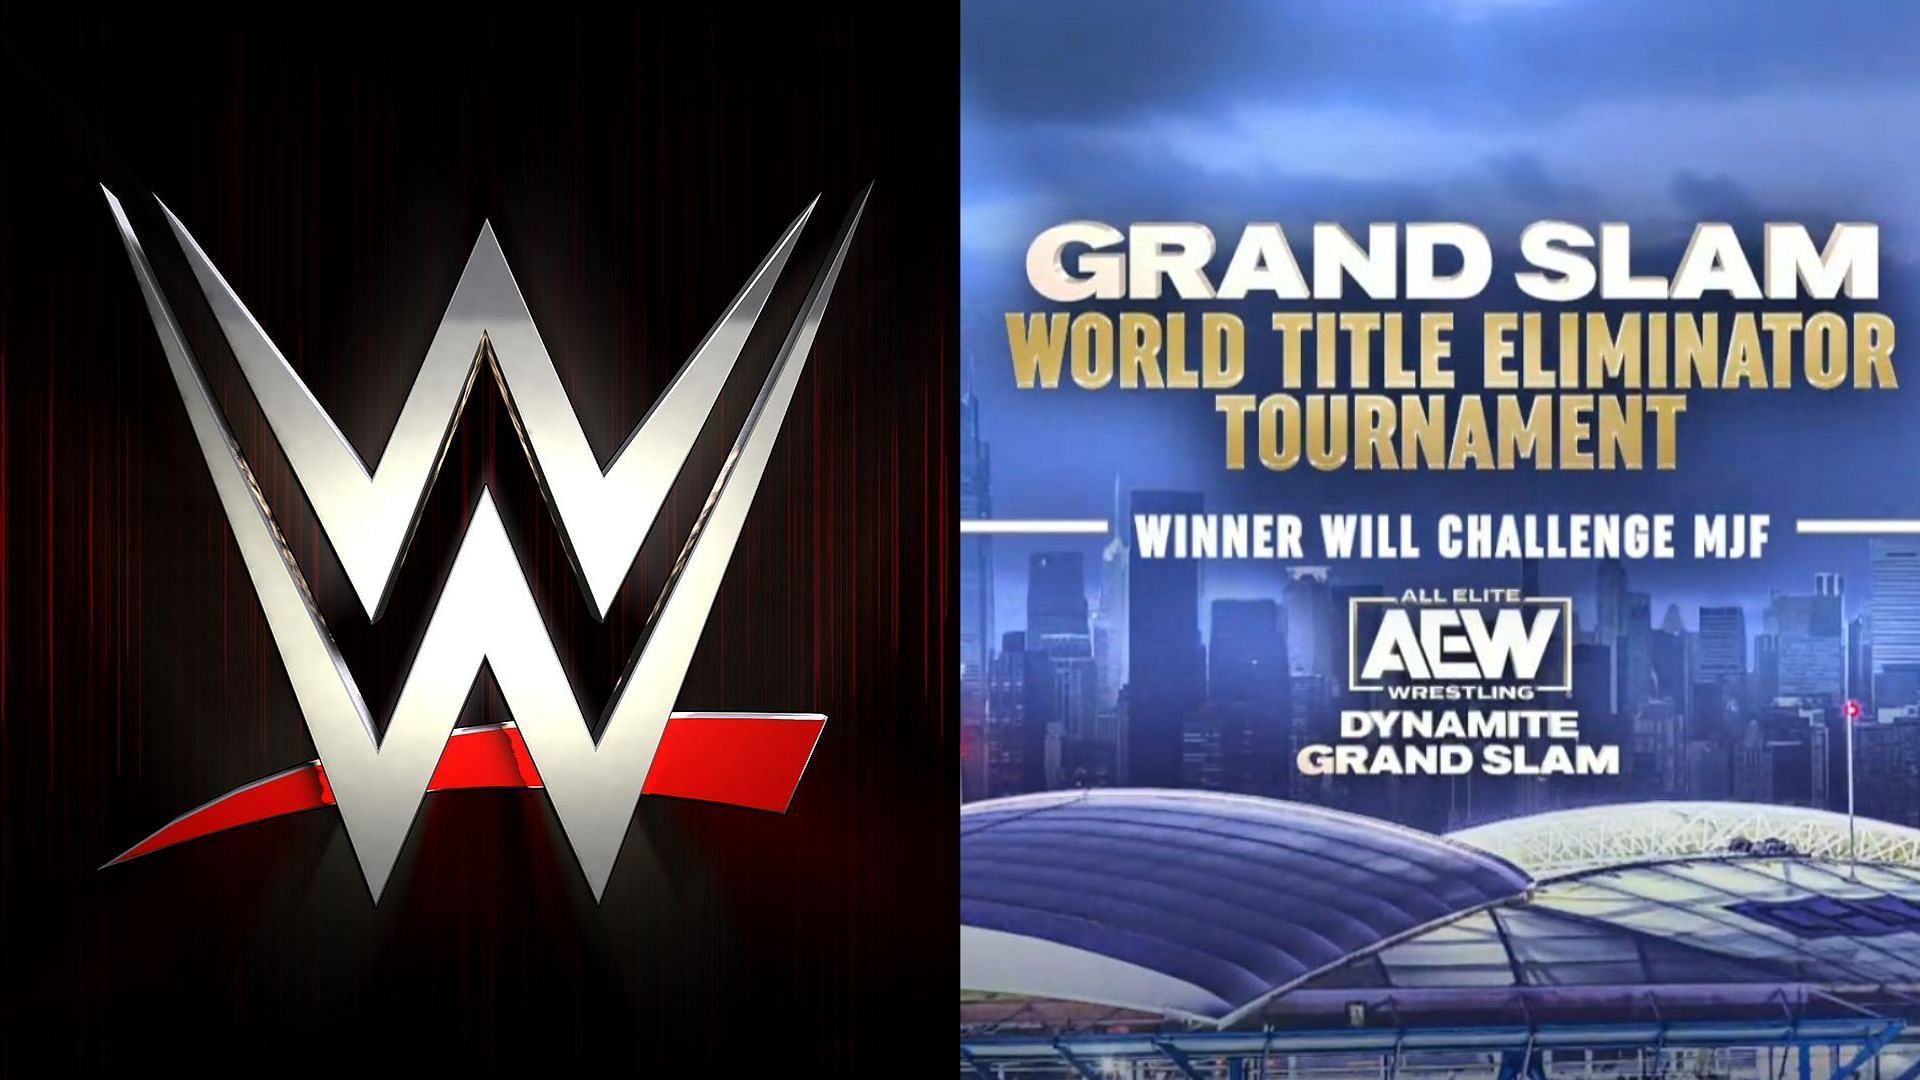 MJF is set to defend his AEW World Title at Arthur Ashe Stadium 